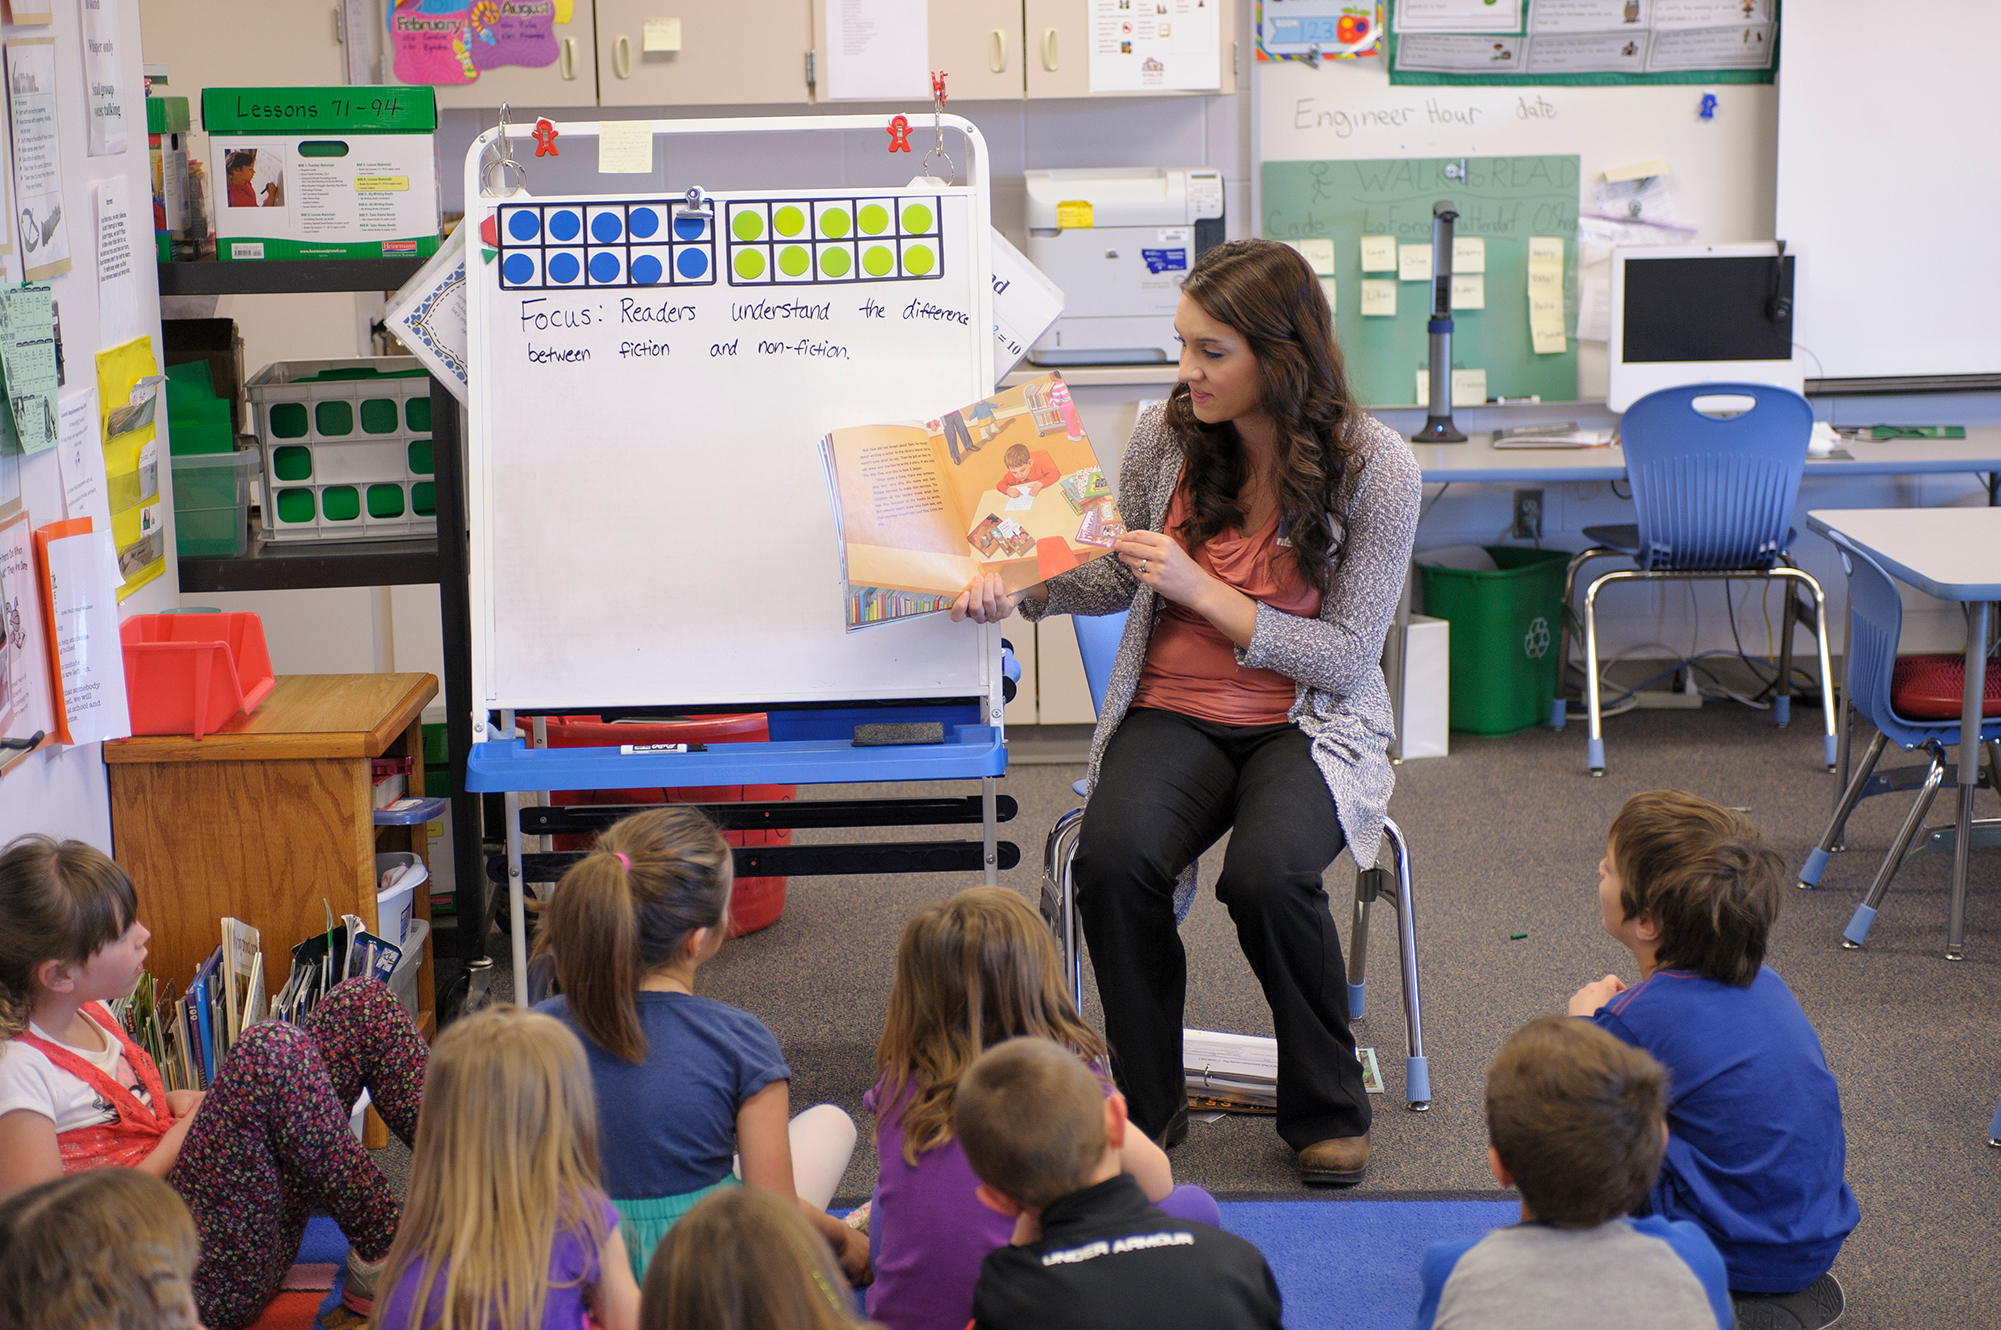 A picture of k12 aged children being read to